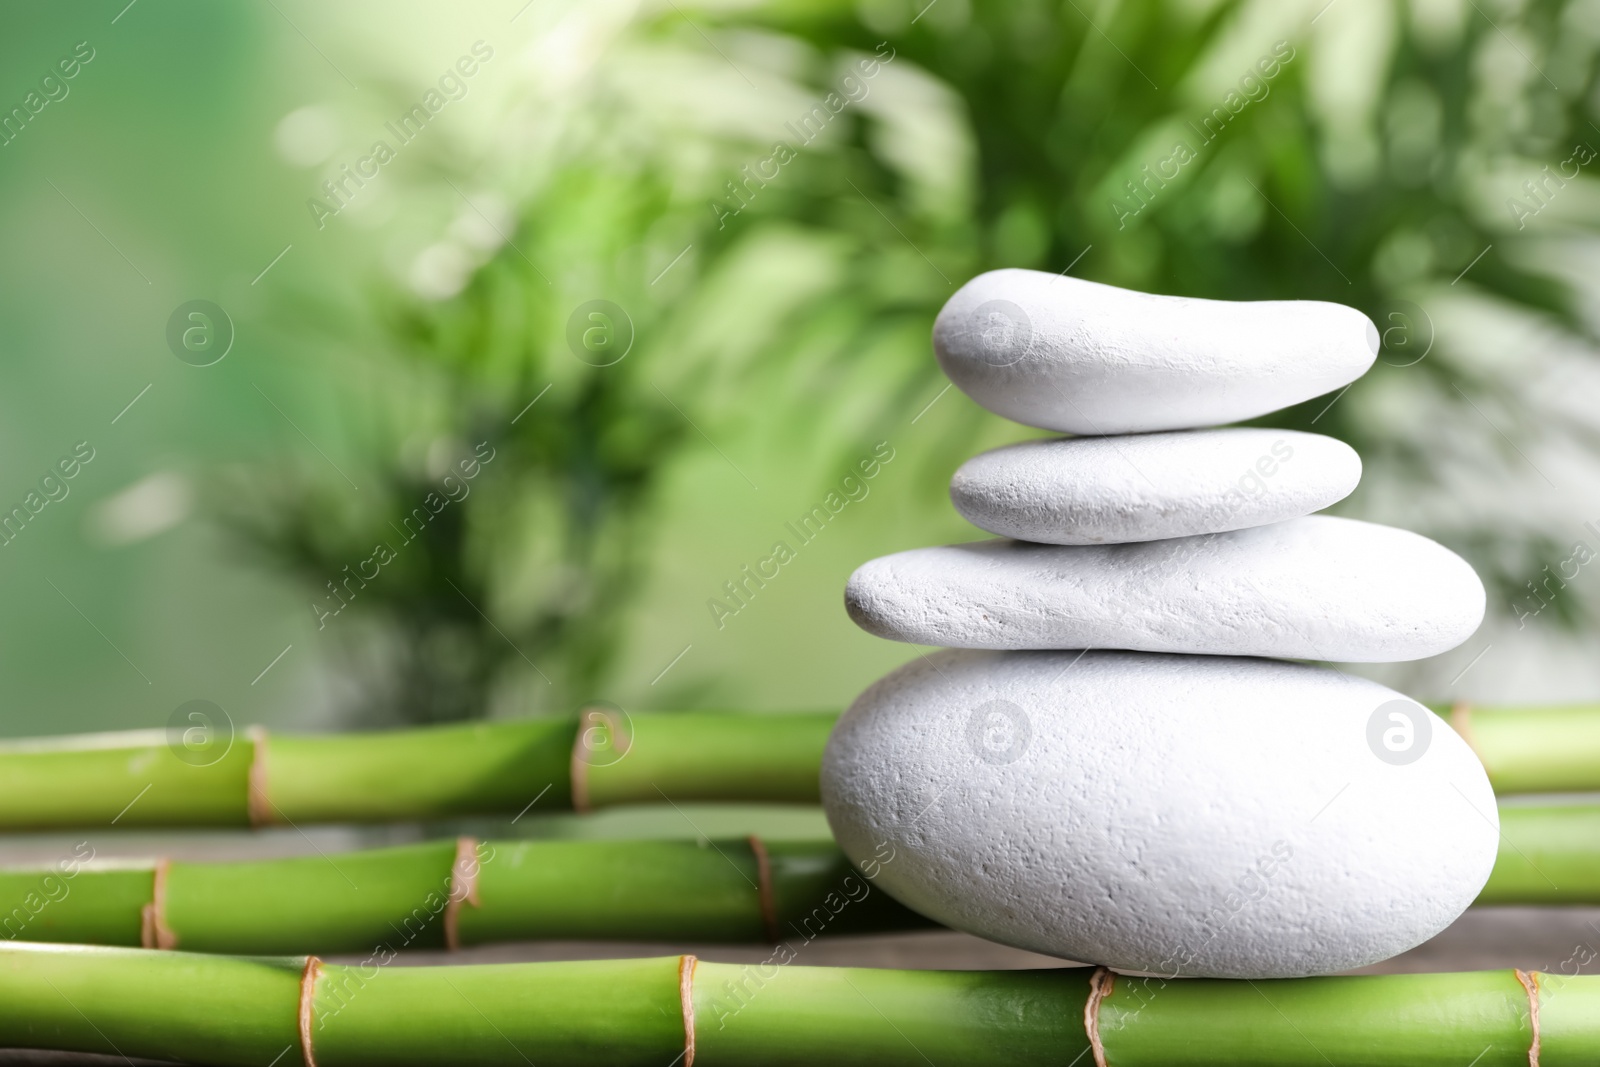 Photo of Stacked white spa stones on bamboo stems against blurred background. Space for text